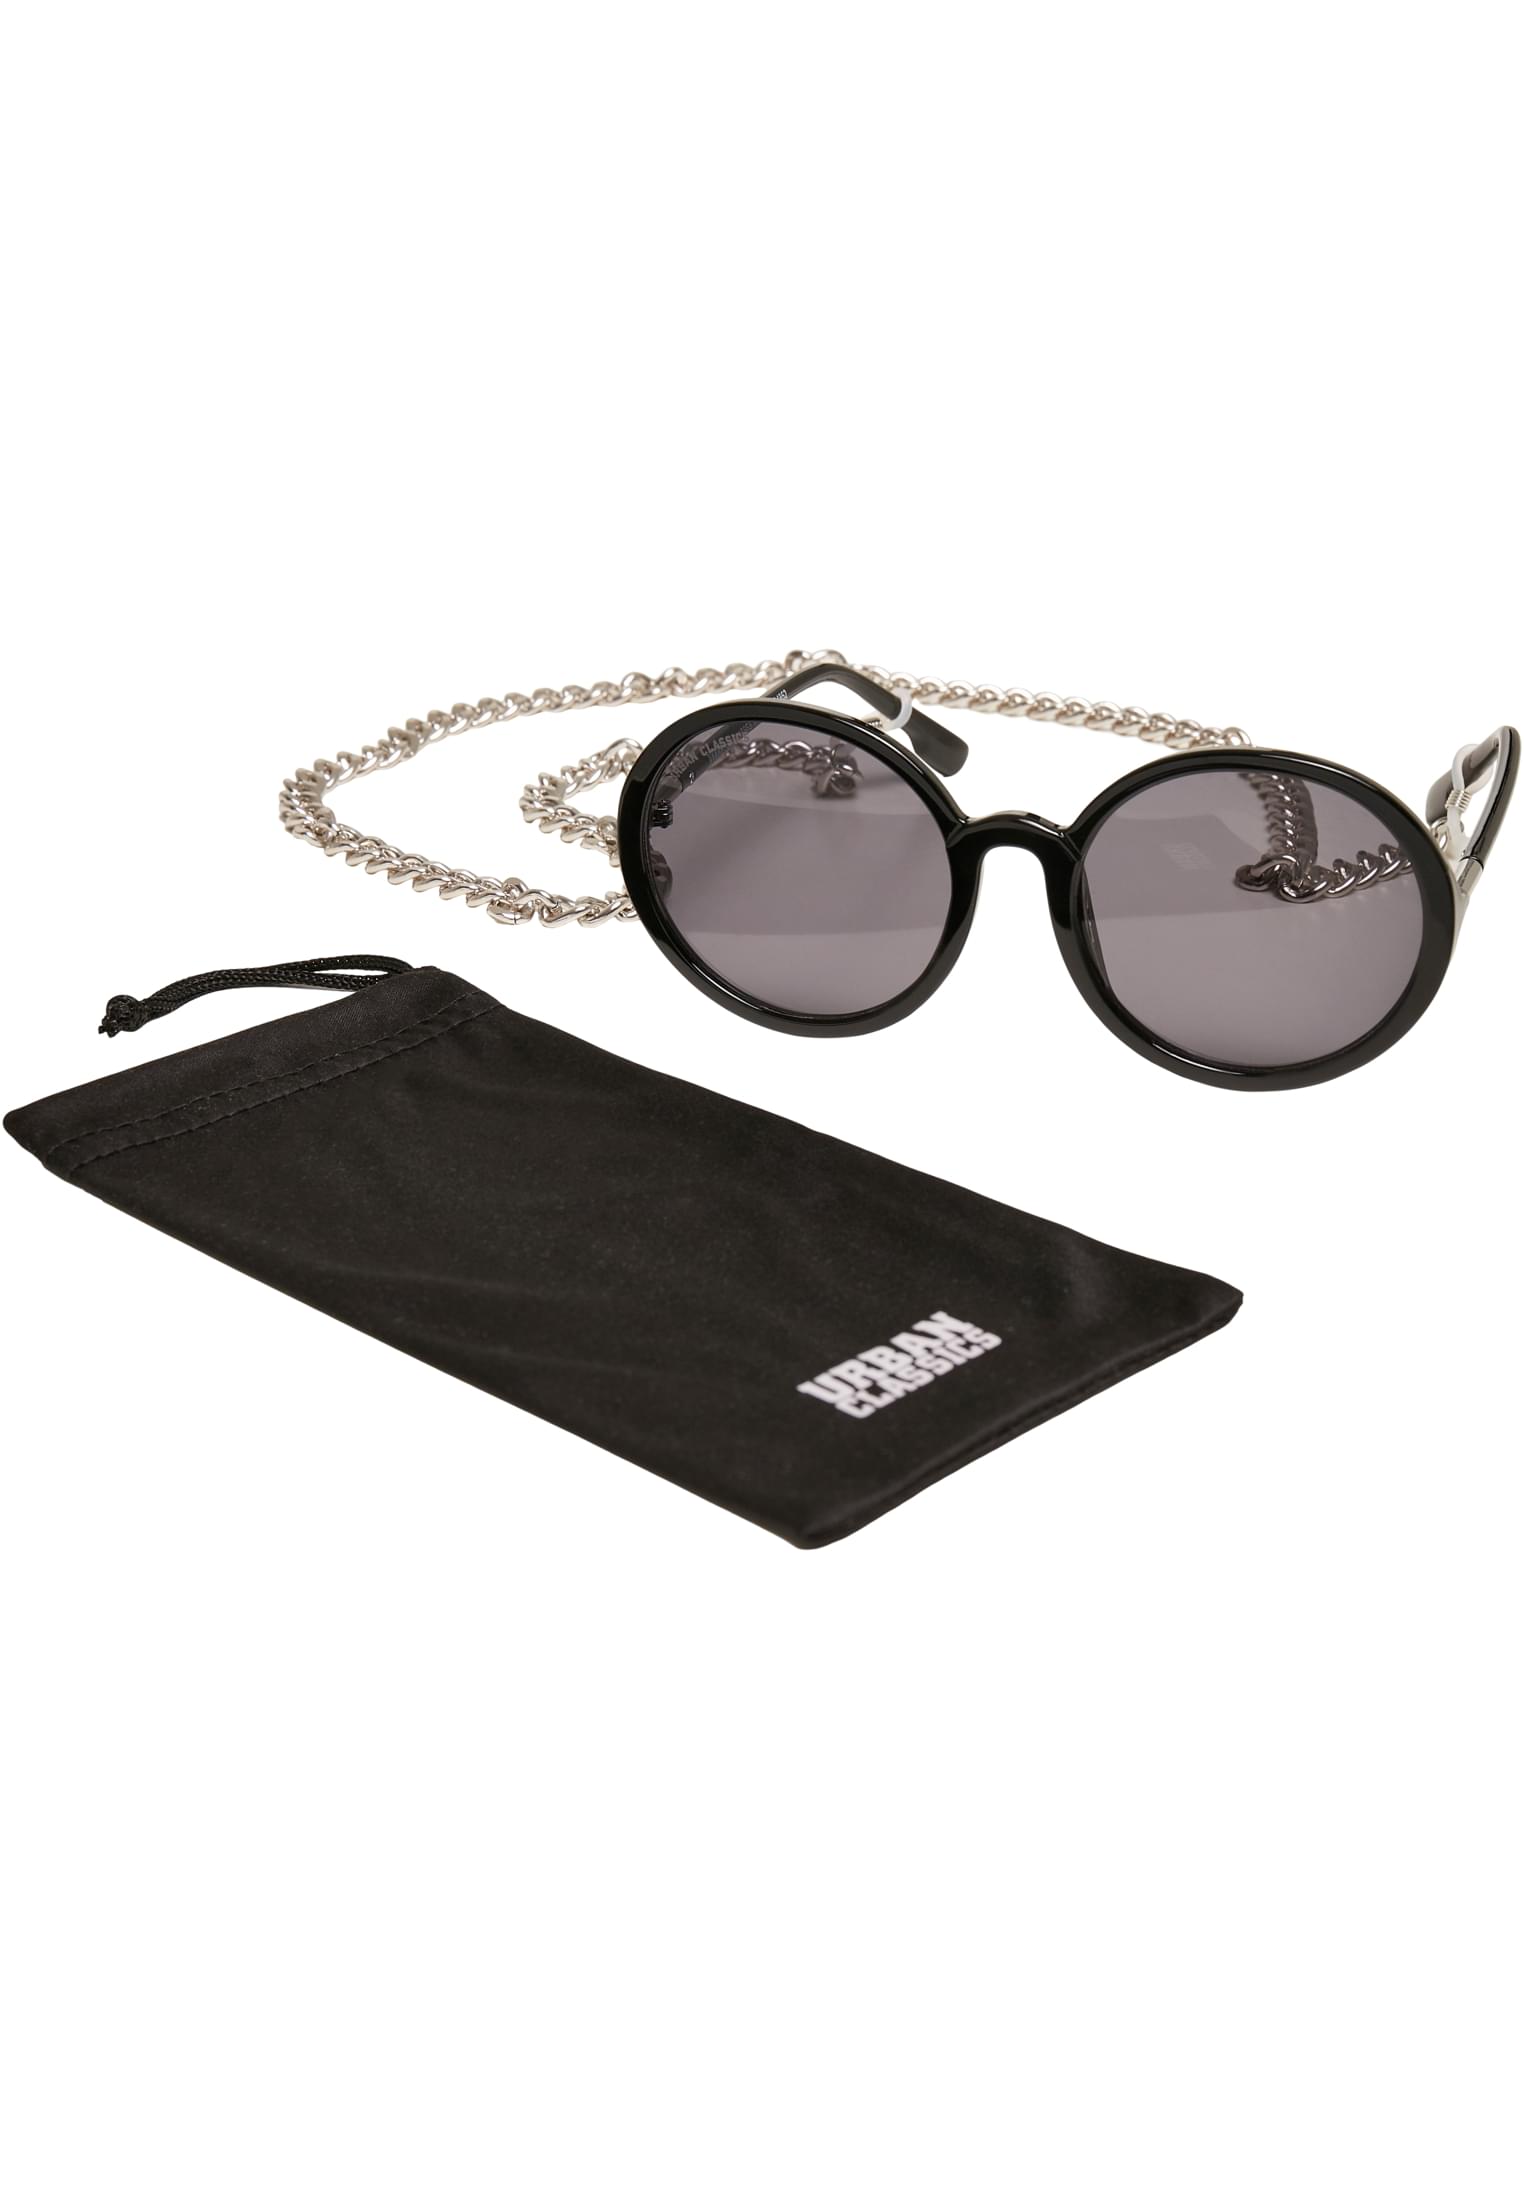 Sunglasses Cannes Chain-TB4852 with